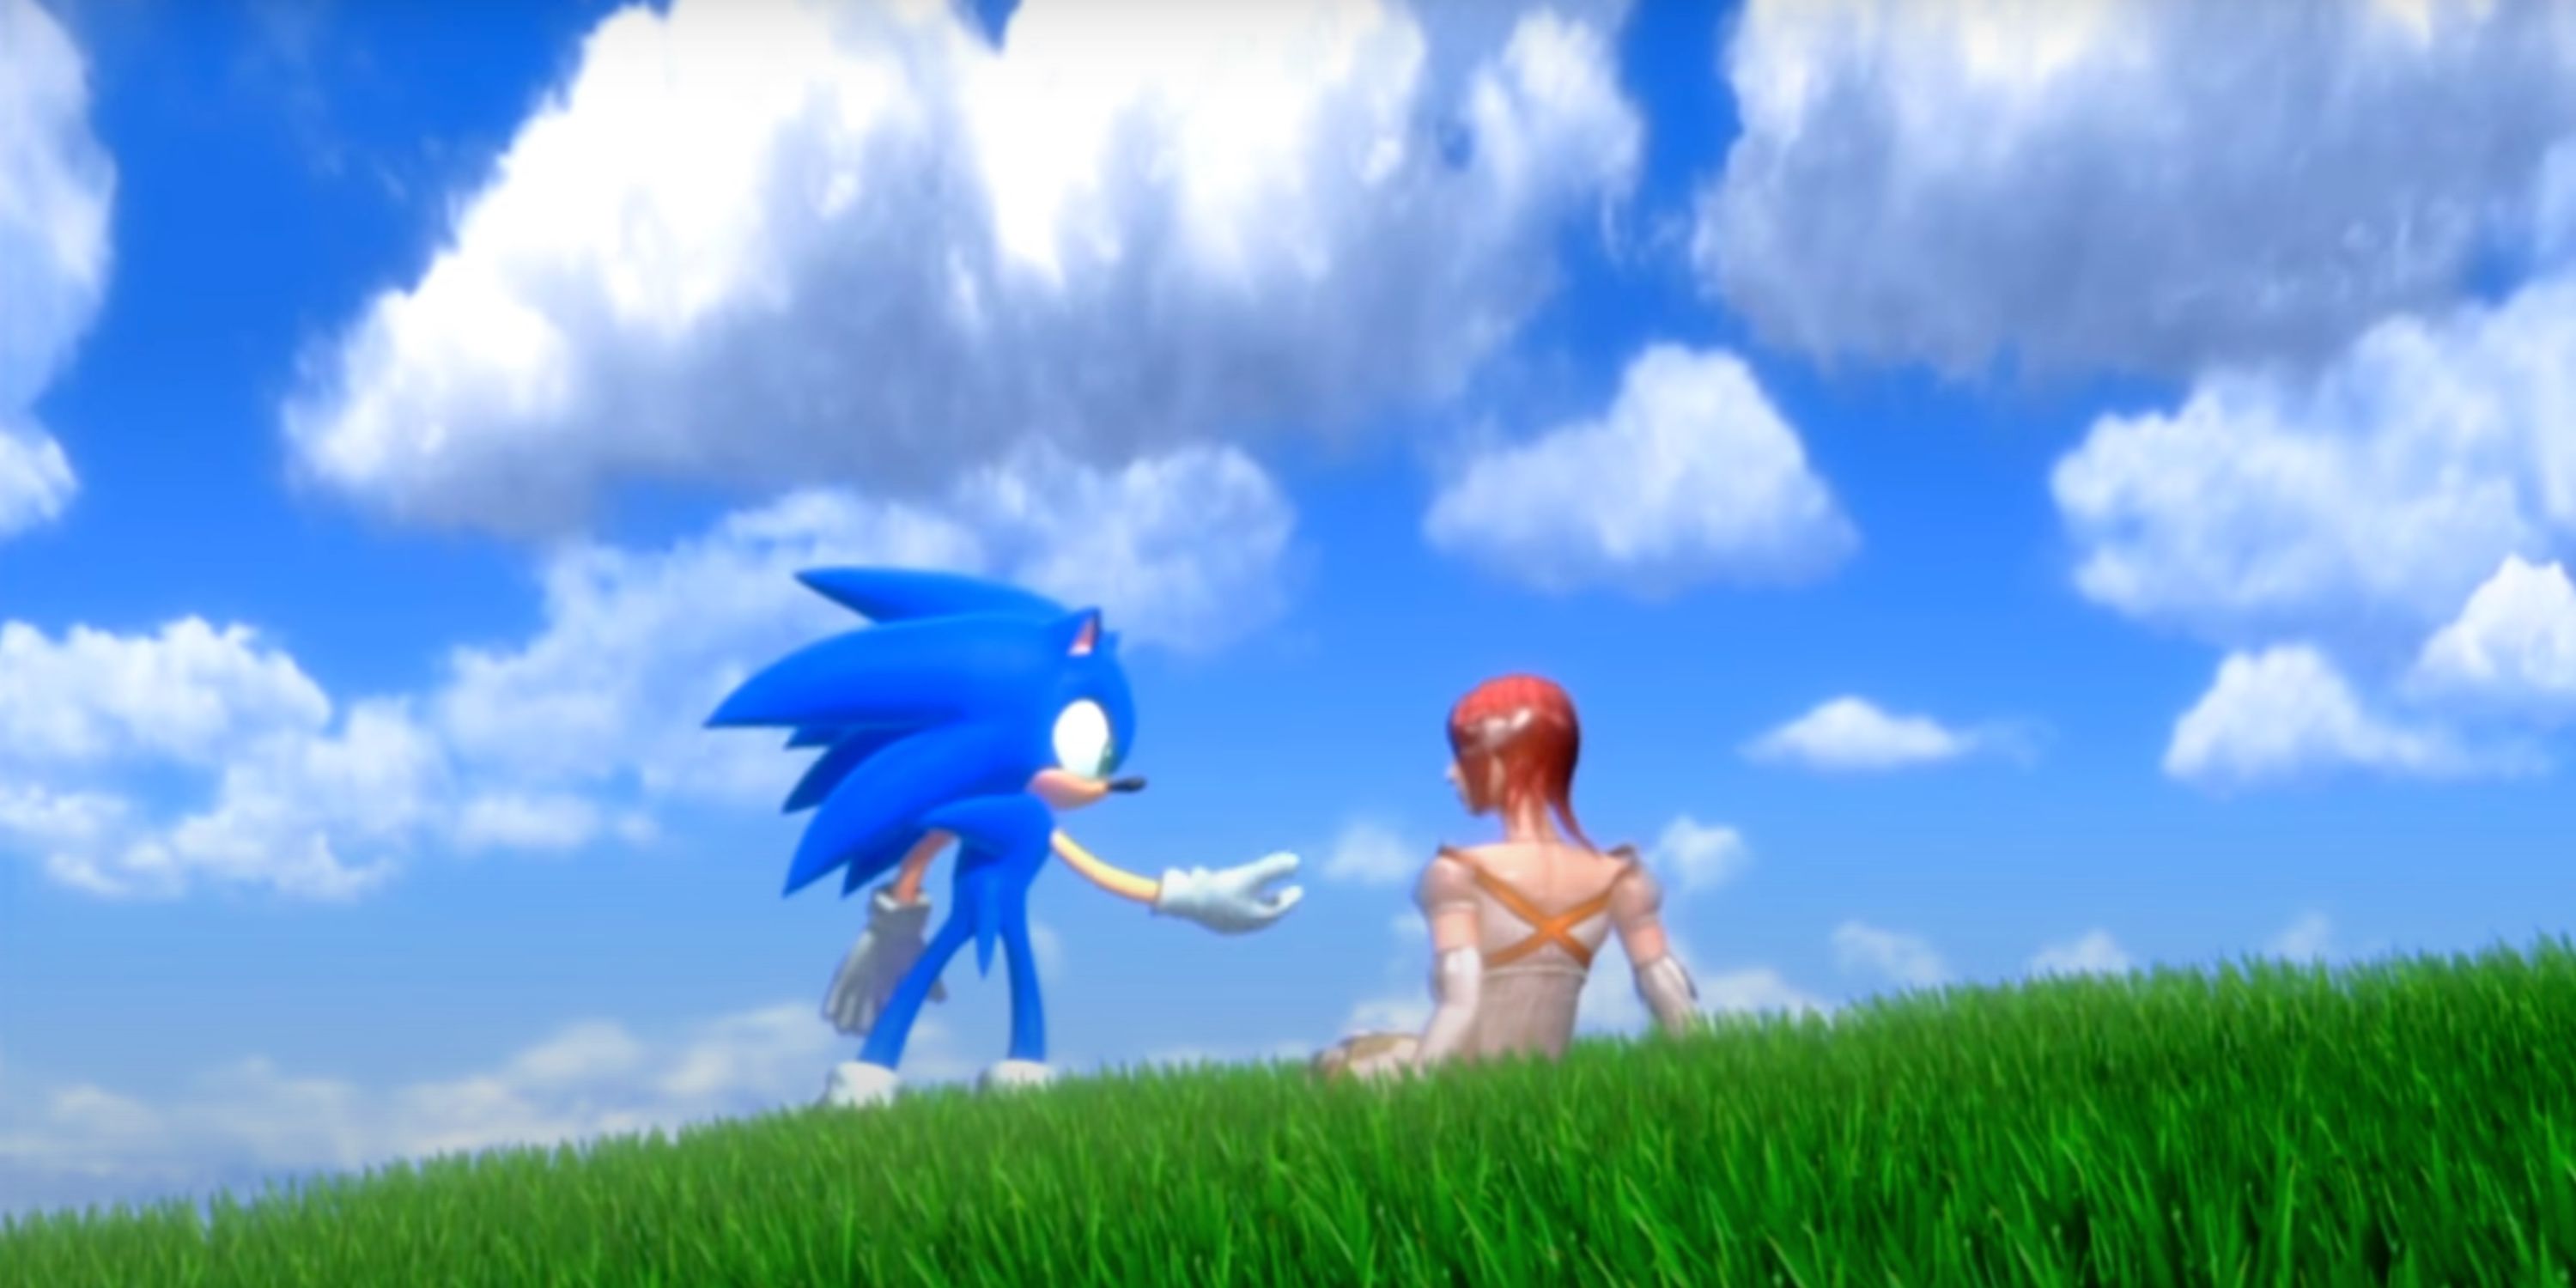 sonic holds out an outstretched hand to princess Elise who's sitting down in a meadow